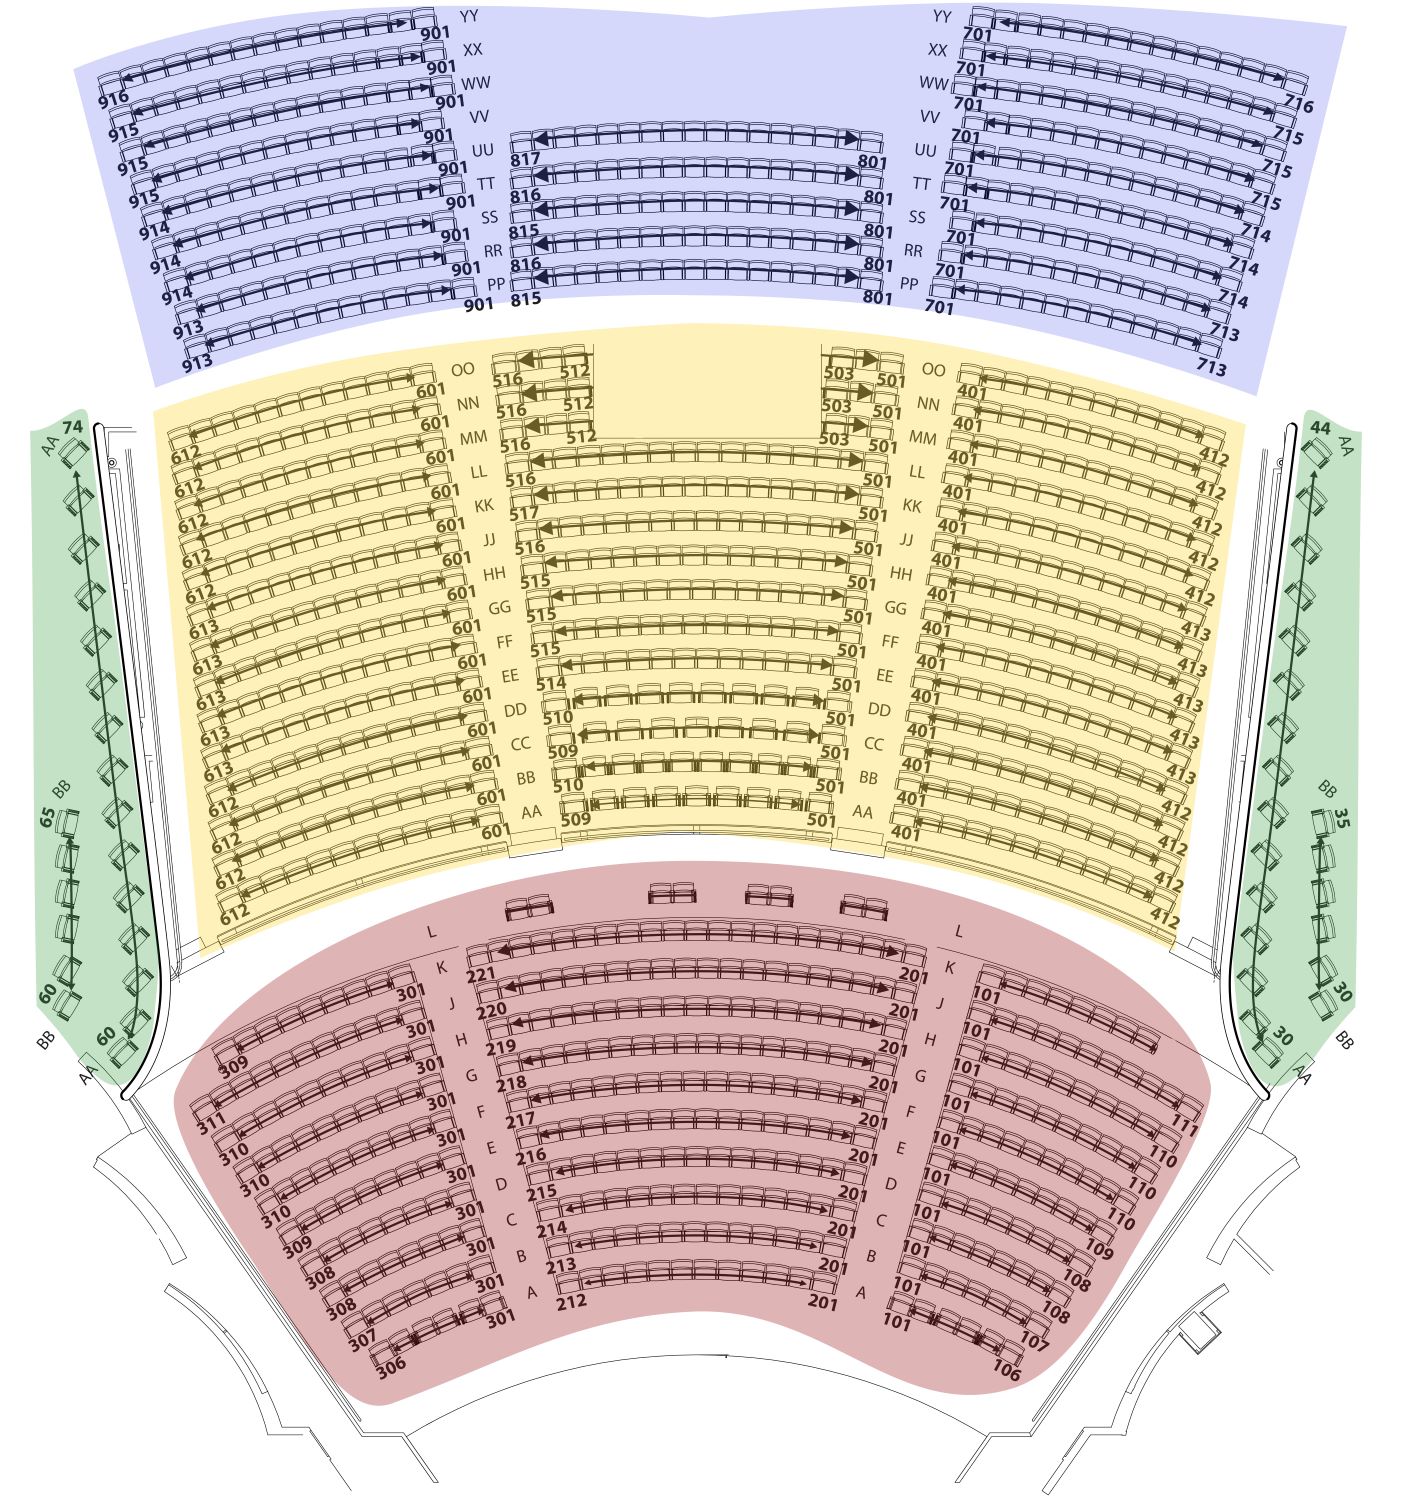 Student Union Theater Seat map